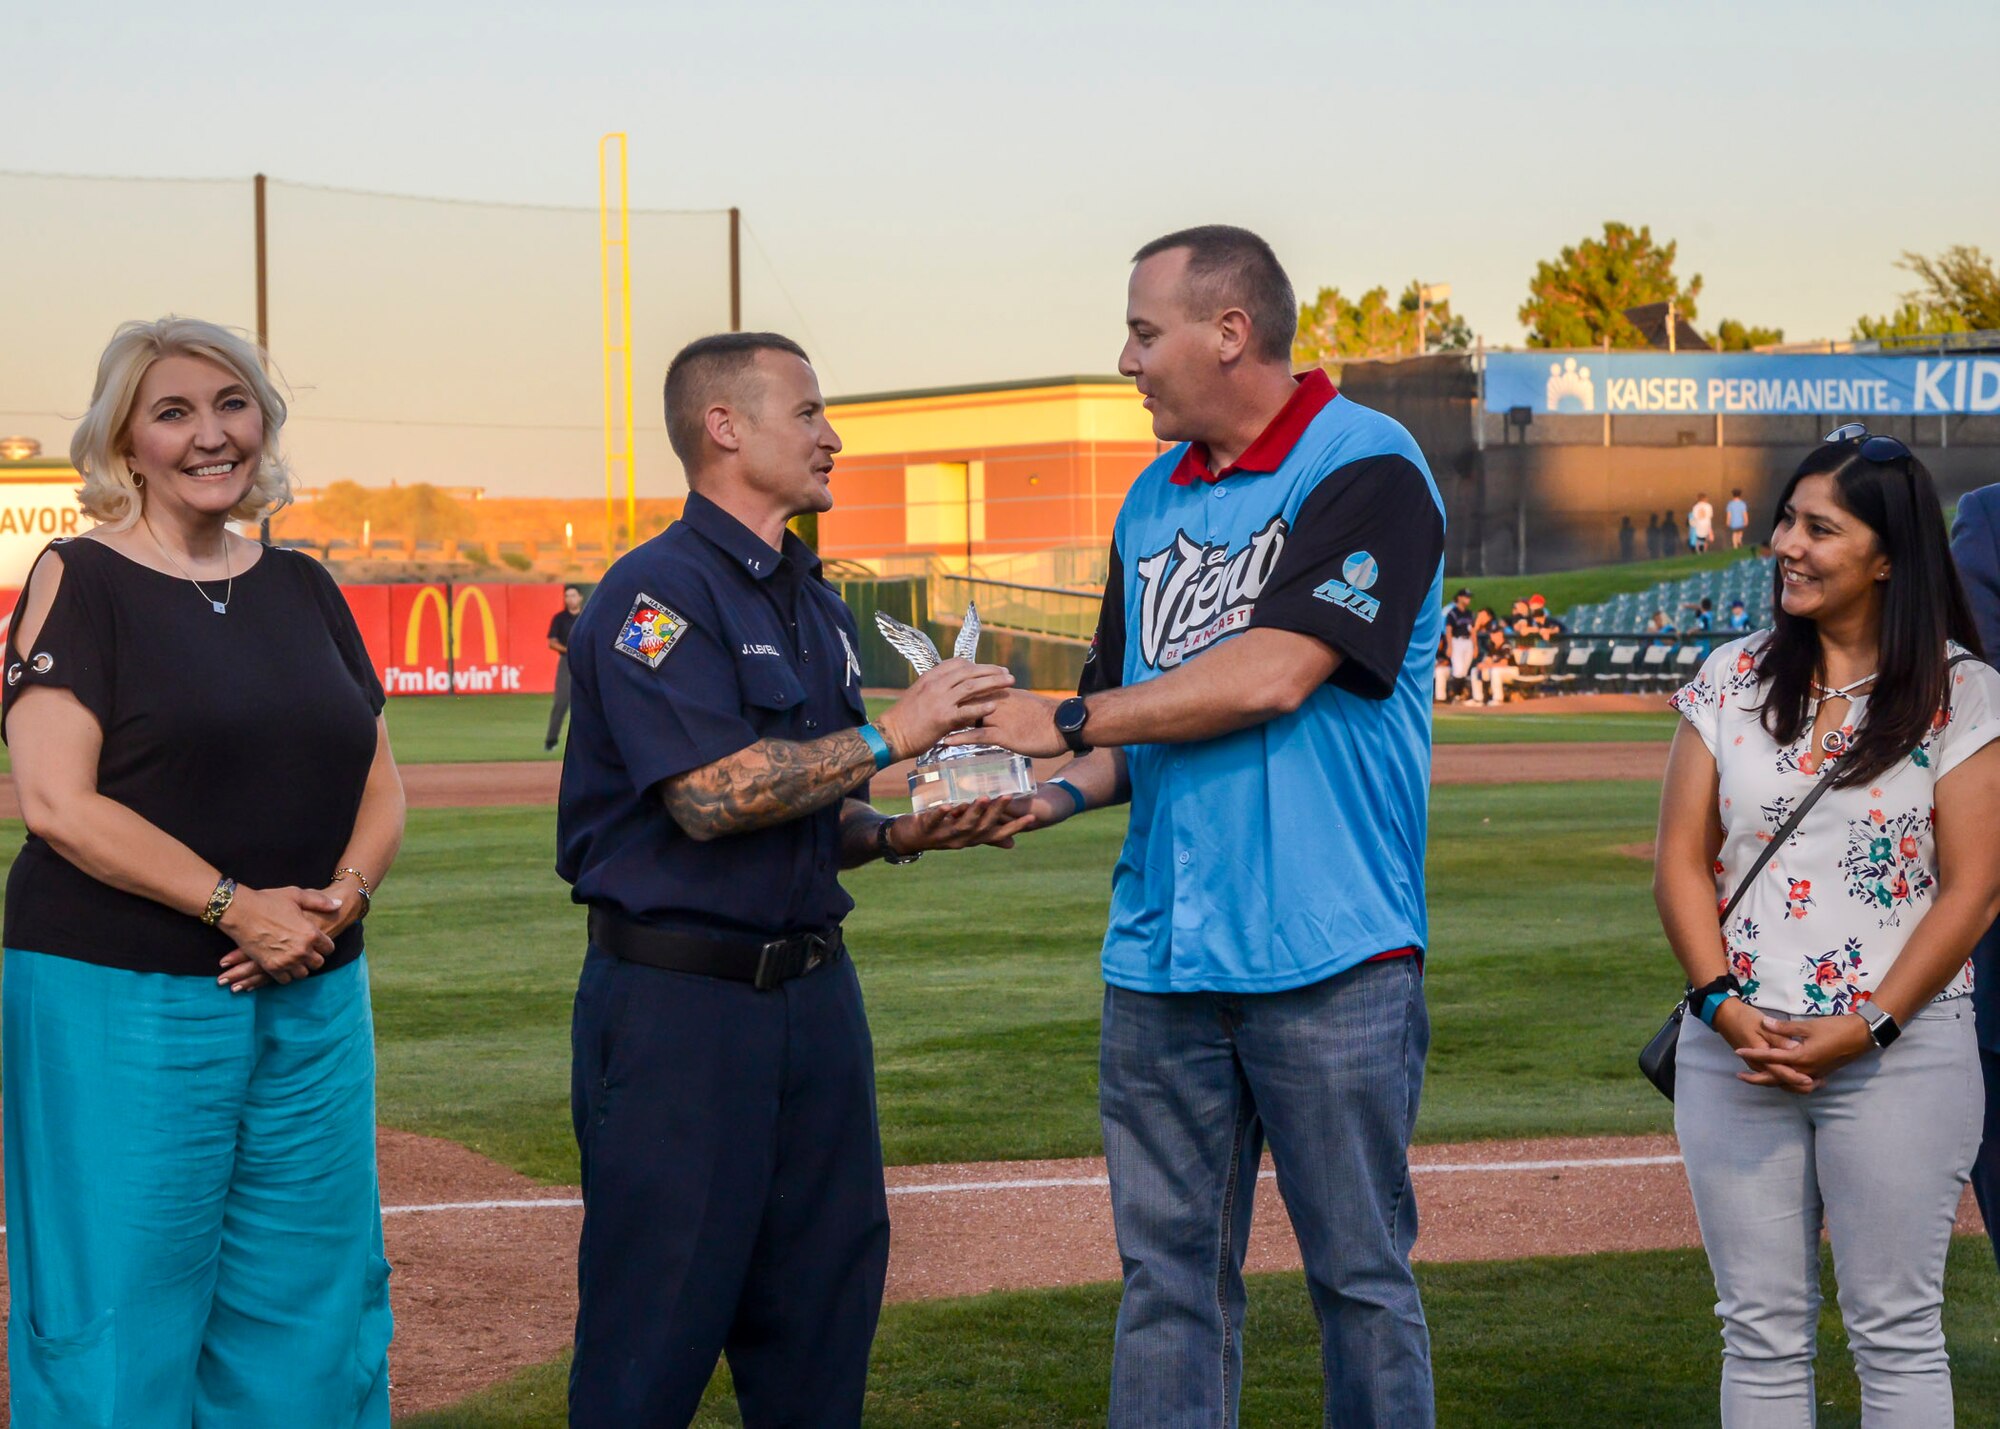 Lead Firefighter James Levell, 812th Civil Engineer Squadron, receives the Bank of America/Merrill Military Service Before Self Award during a Lancaster JetHawks game at the Hangar baseball stadium in Lancaster, California, Aug. 24. (U.S. Air Force photo by Giancarlo Casem)